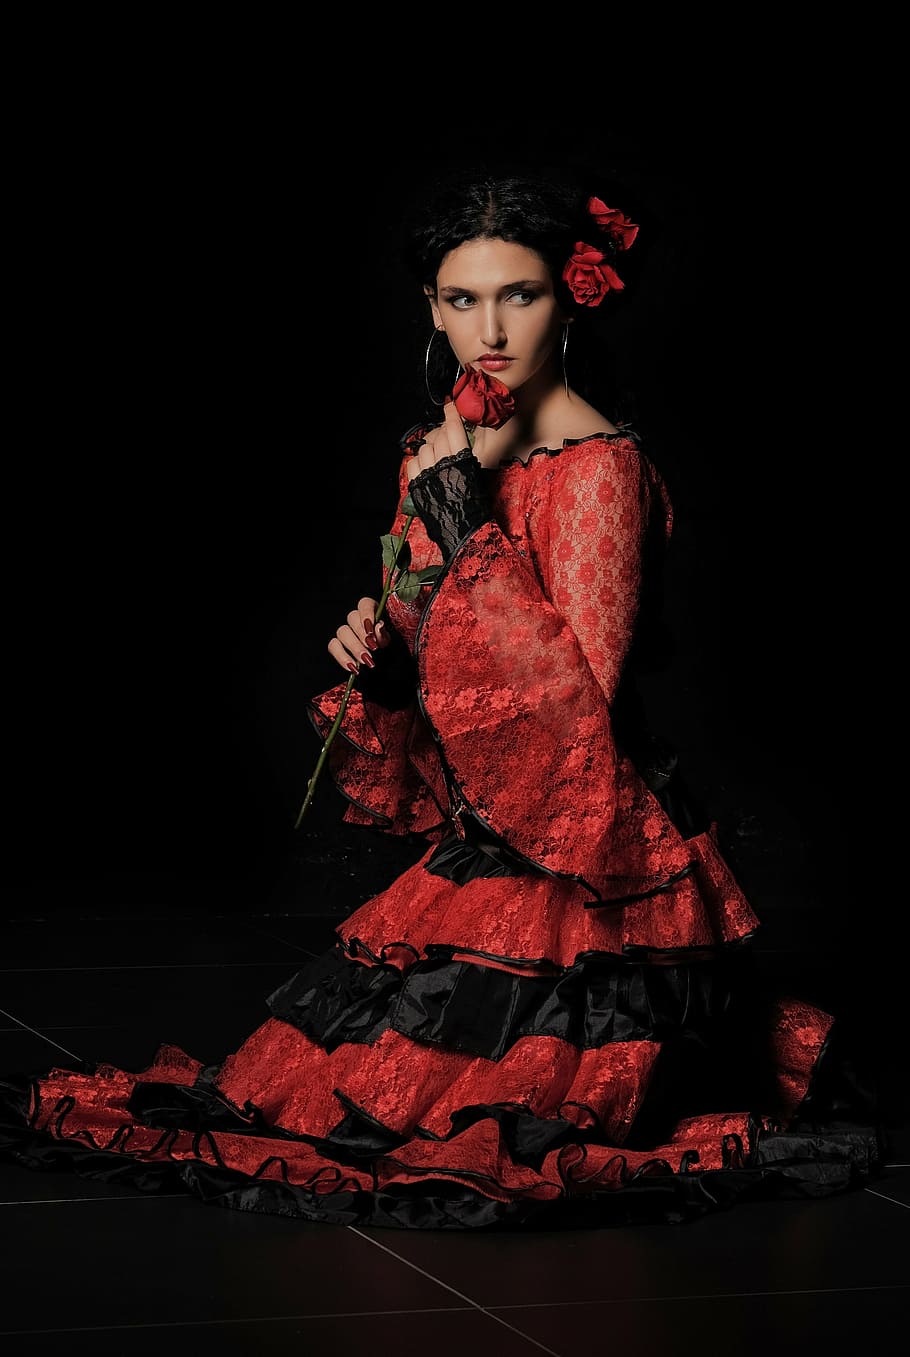 woman, wearing, red, black, long-sleeved, ruffled, dress, holding, rose, background